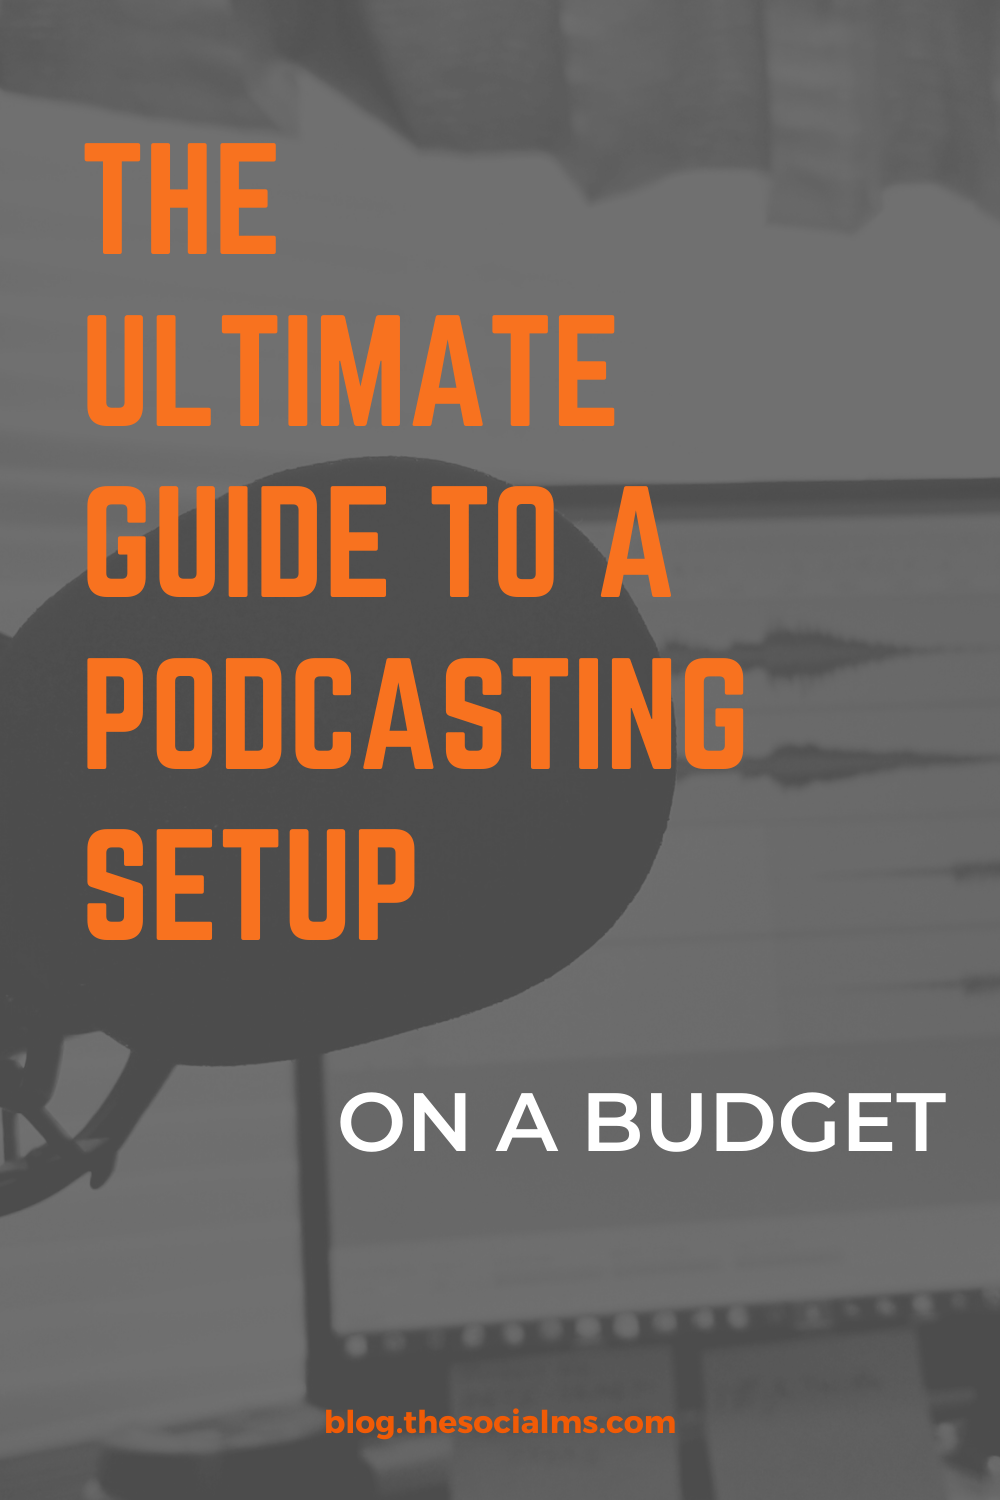 getting together a decent podcasting setup on a minimal budget isn’t easy. But it is possible. #podcasting #podcastingsetup #bloggingtips #contentmarketing #contentcreation #bloggingtools